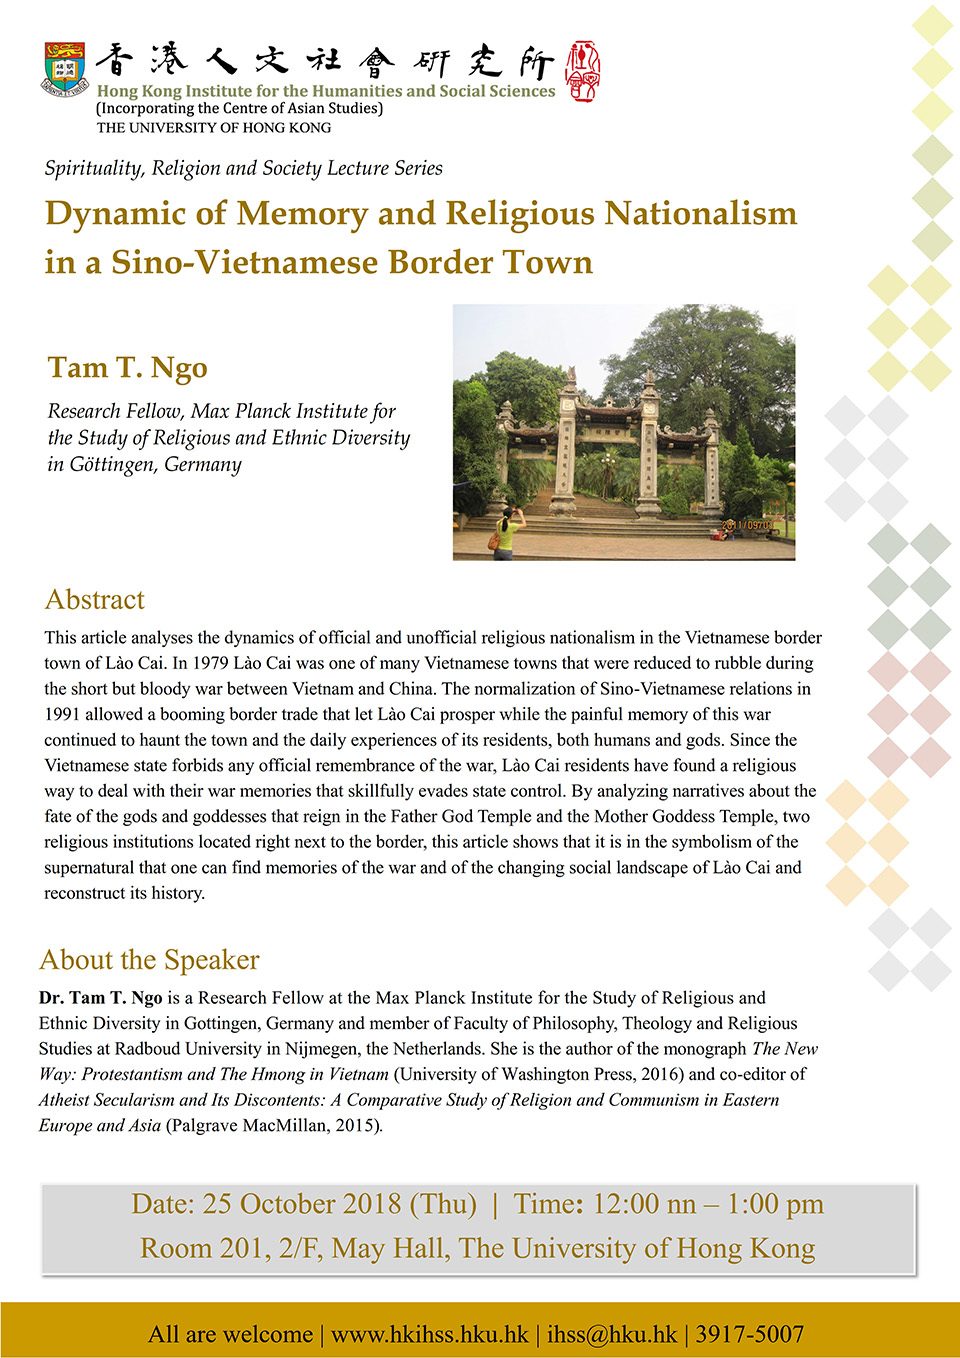 Spirituality, Religion and Society Lecture Series “Dynamic of Memory and Religious Nationalism in a Sino-Vietnamese Border Town” by Dr. Tam T. Ngo (October 25, 2018)